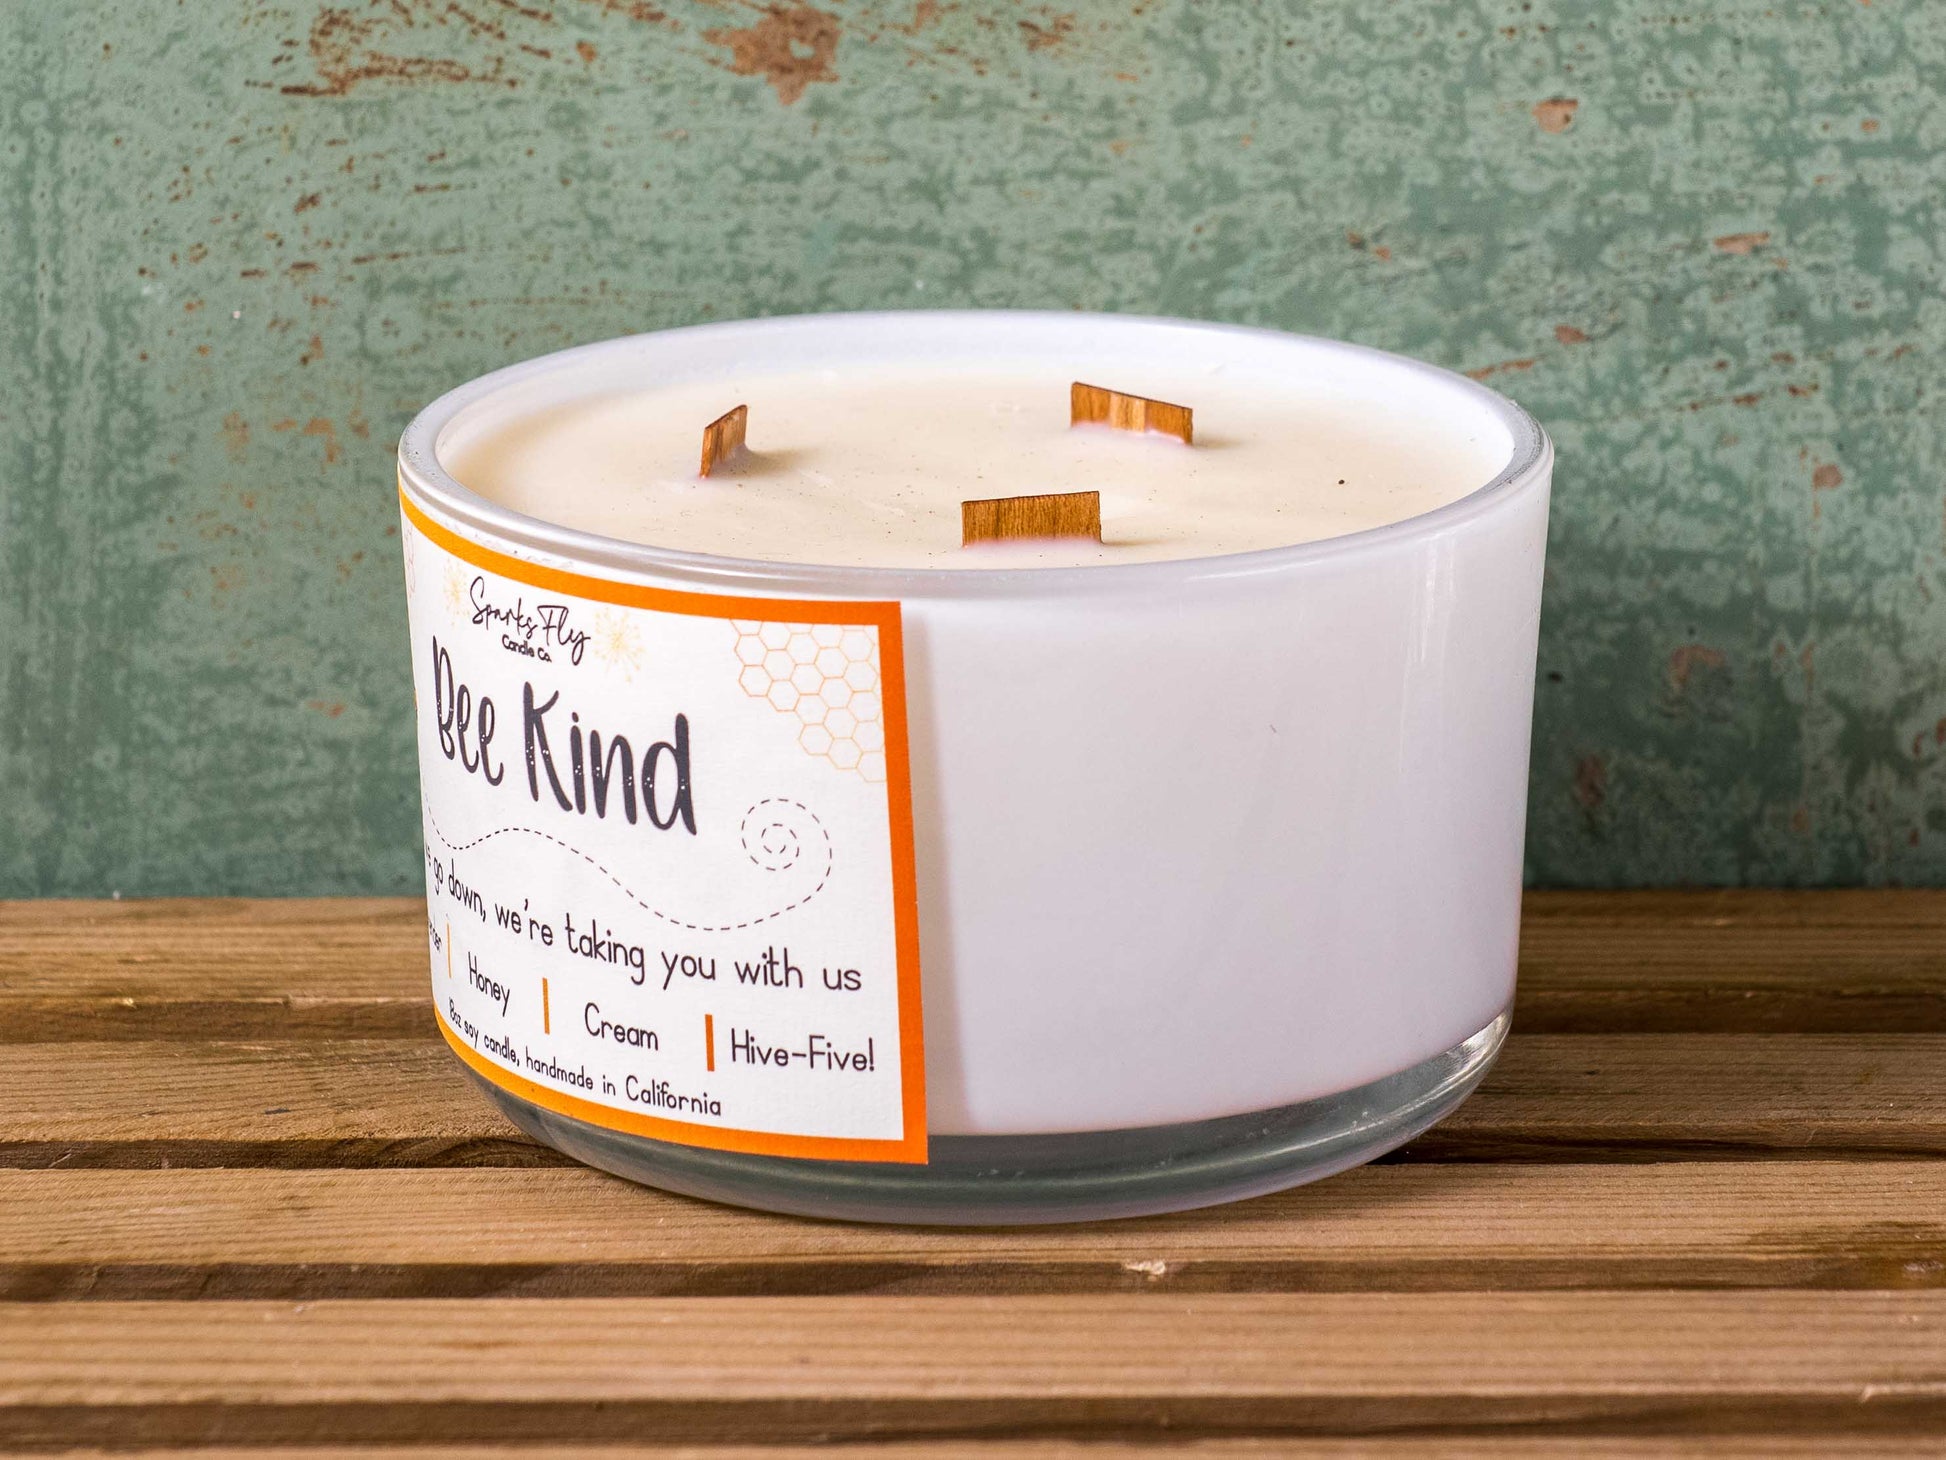 Bee Kind sassy candle; a playful reminder of the bees' importance with a cheeky message. satire